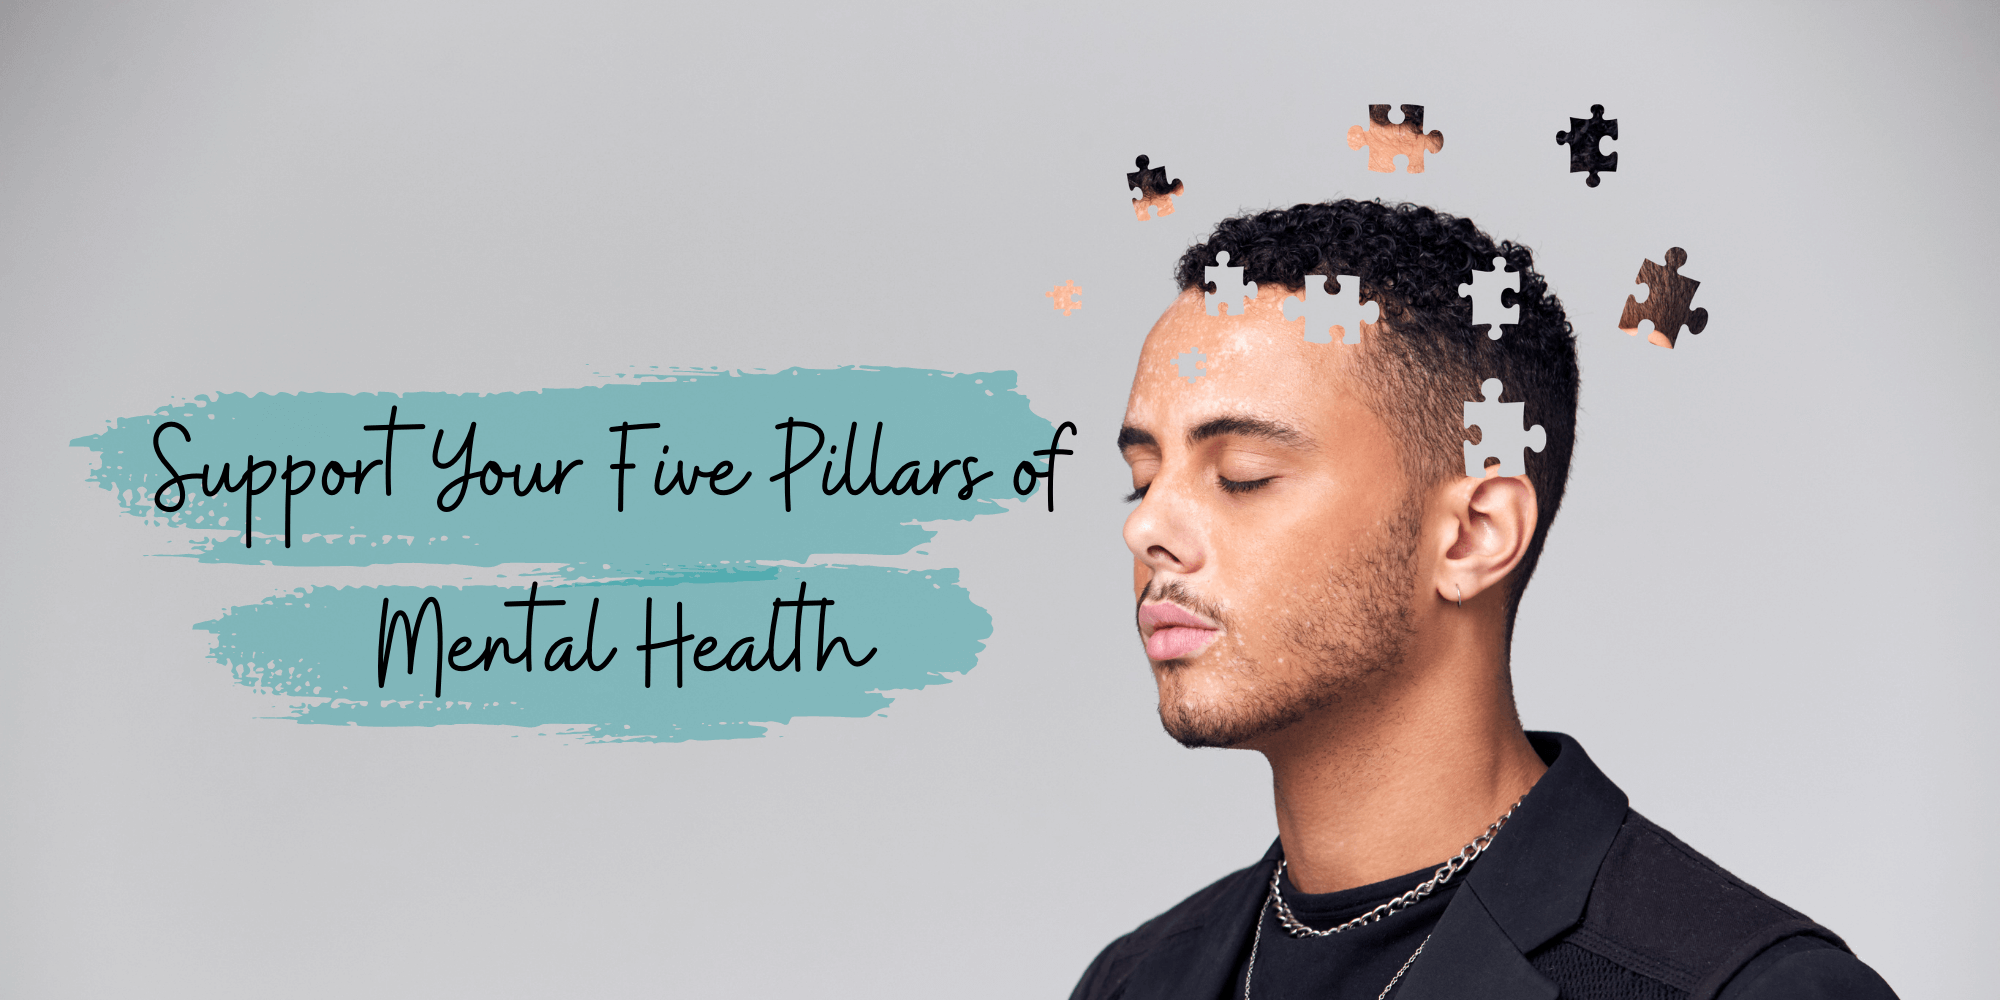 Support your five pillars of mental health title showing a black man with puzzle pieces floating around his head